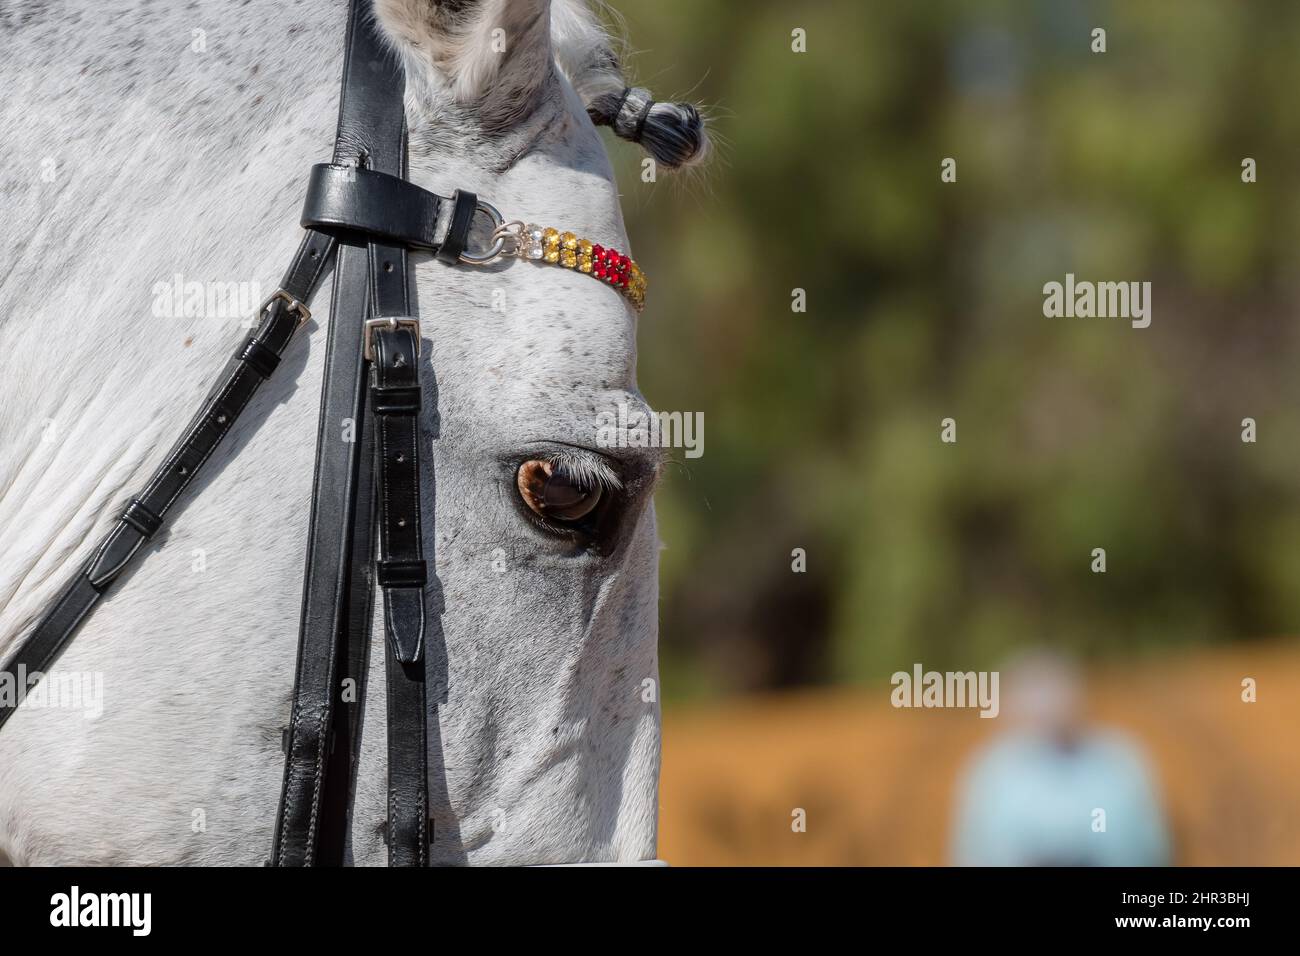 Detail of the eye of spanish horse in dressage Stock Photo